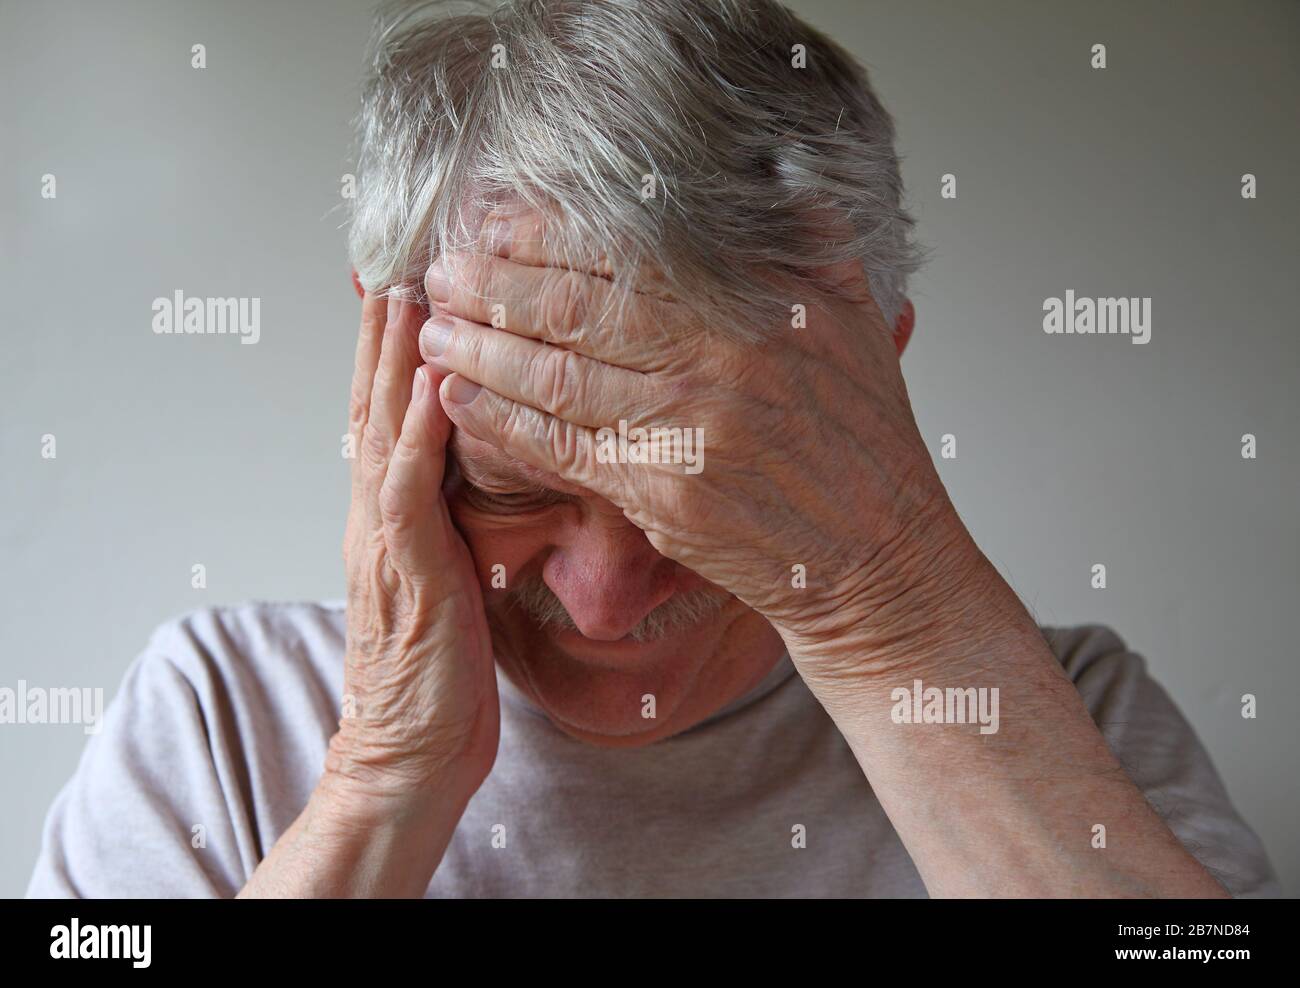 Older man with his hands on forehead and side of face Stock Photo